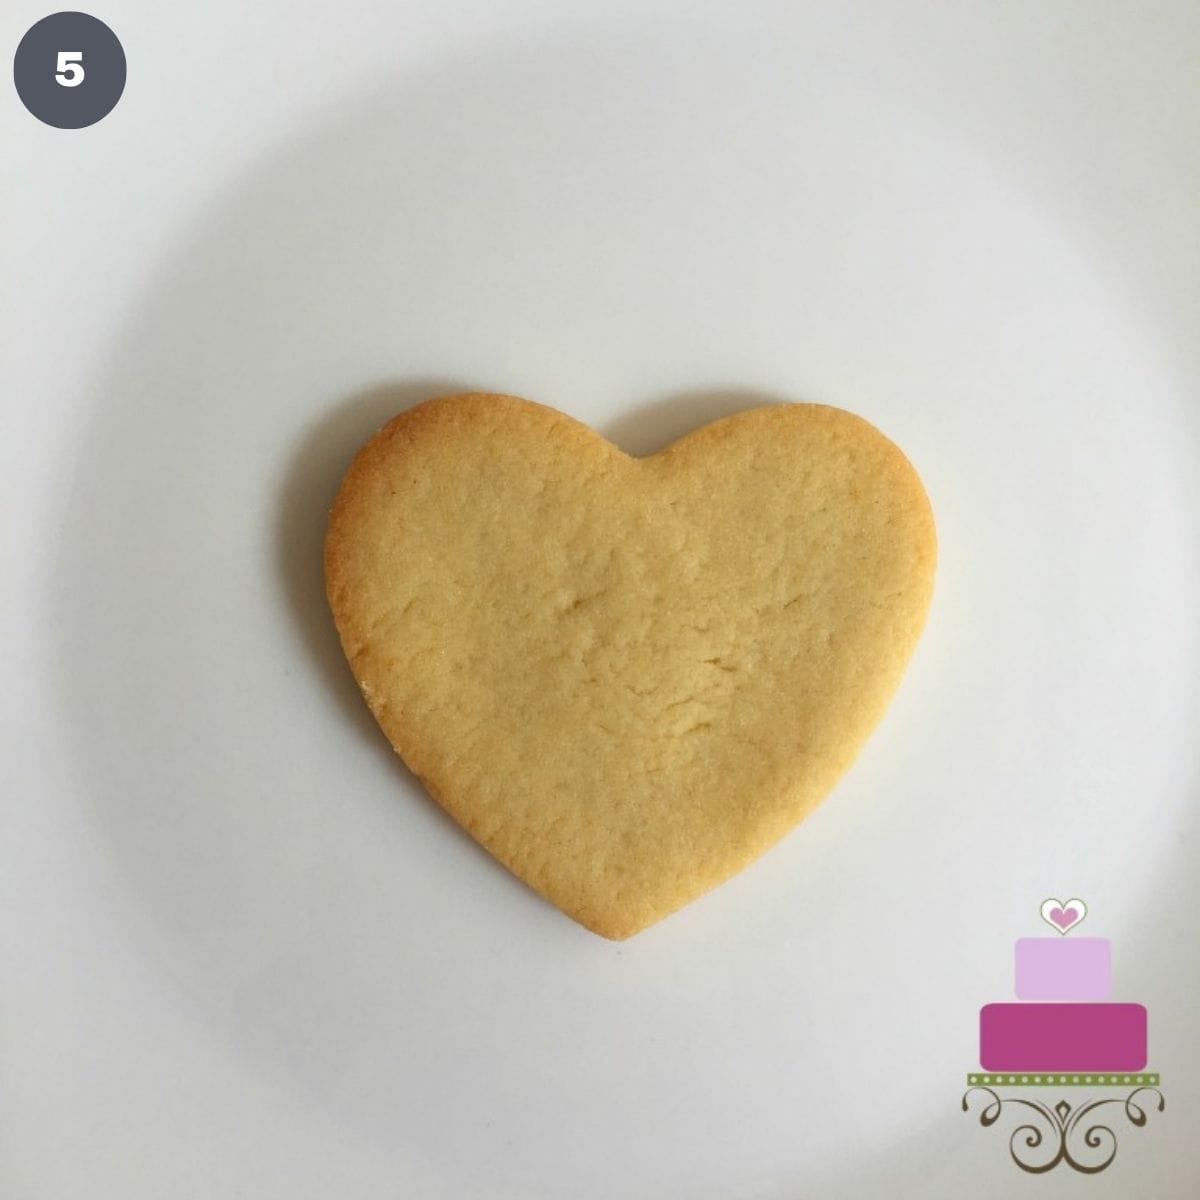 A heart shaped cookie.